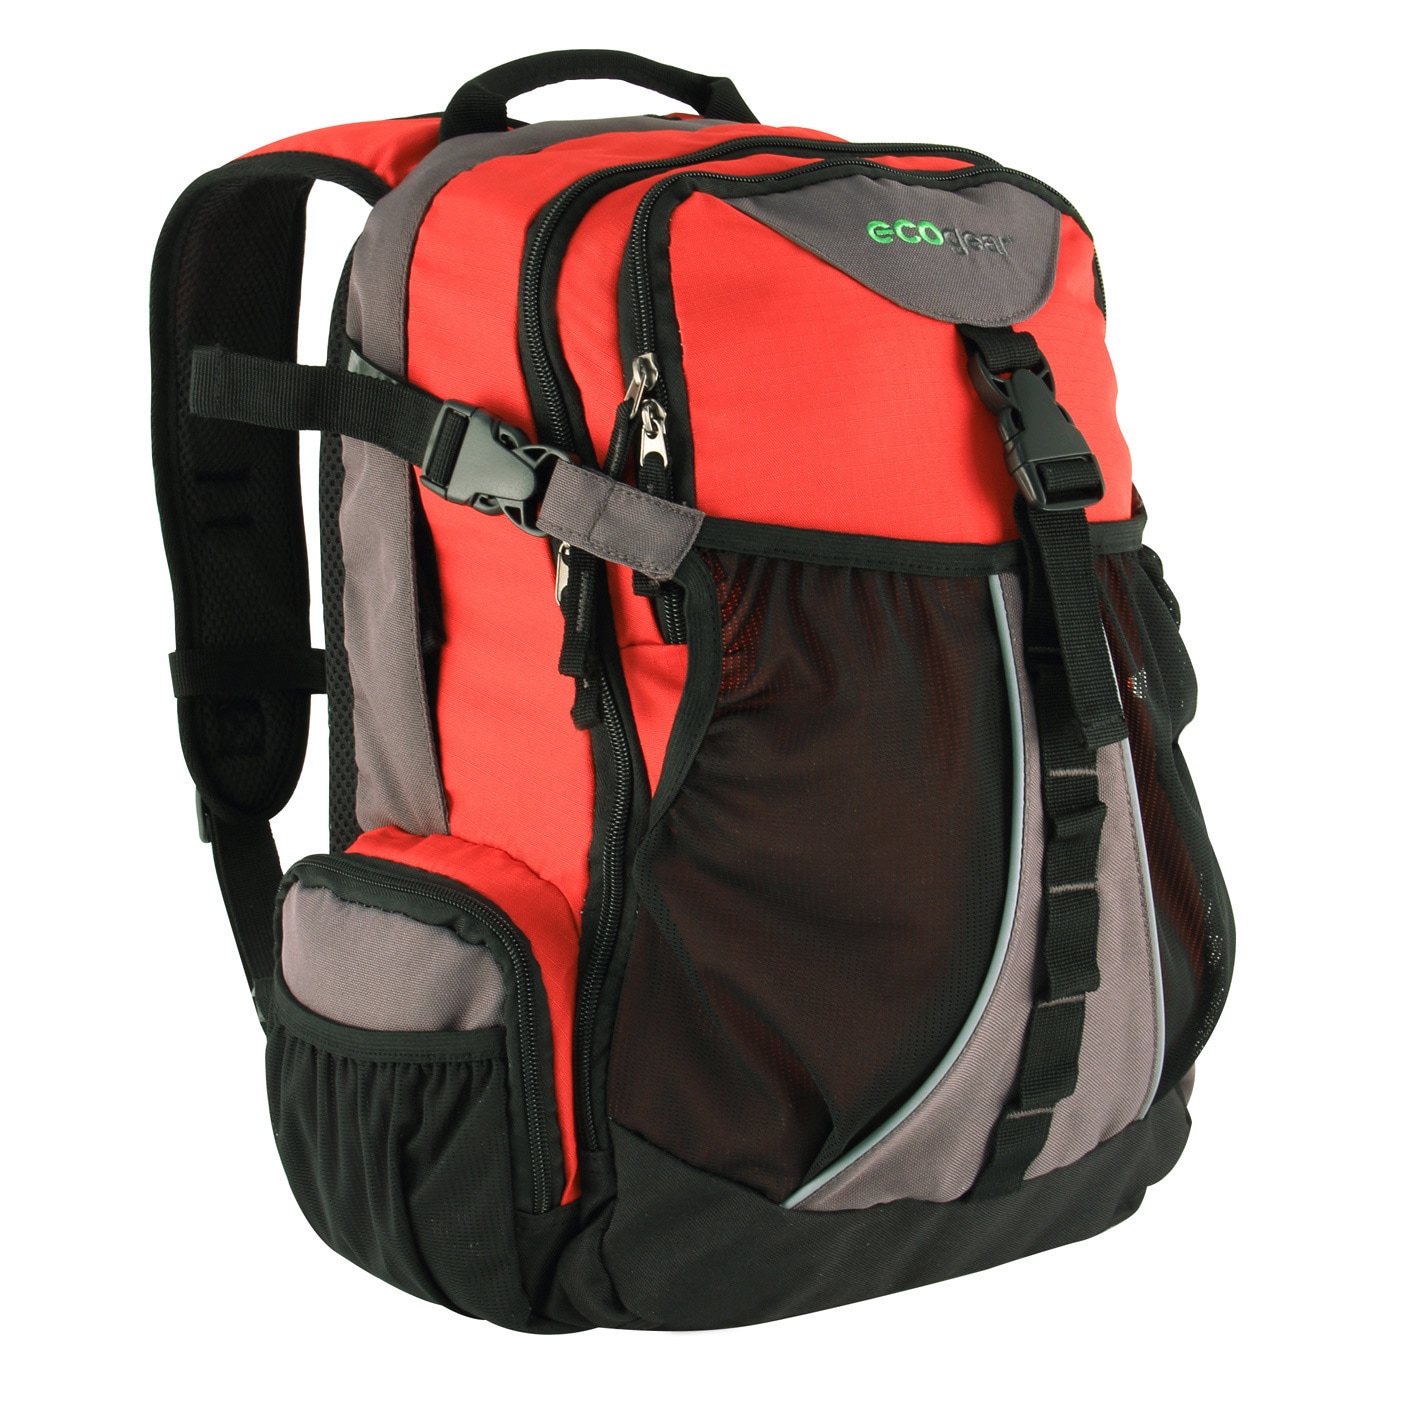 Ecogear Big Horn Ii 18.5 inch Recycled Backpack With Mesh Back